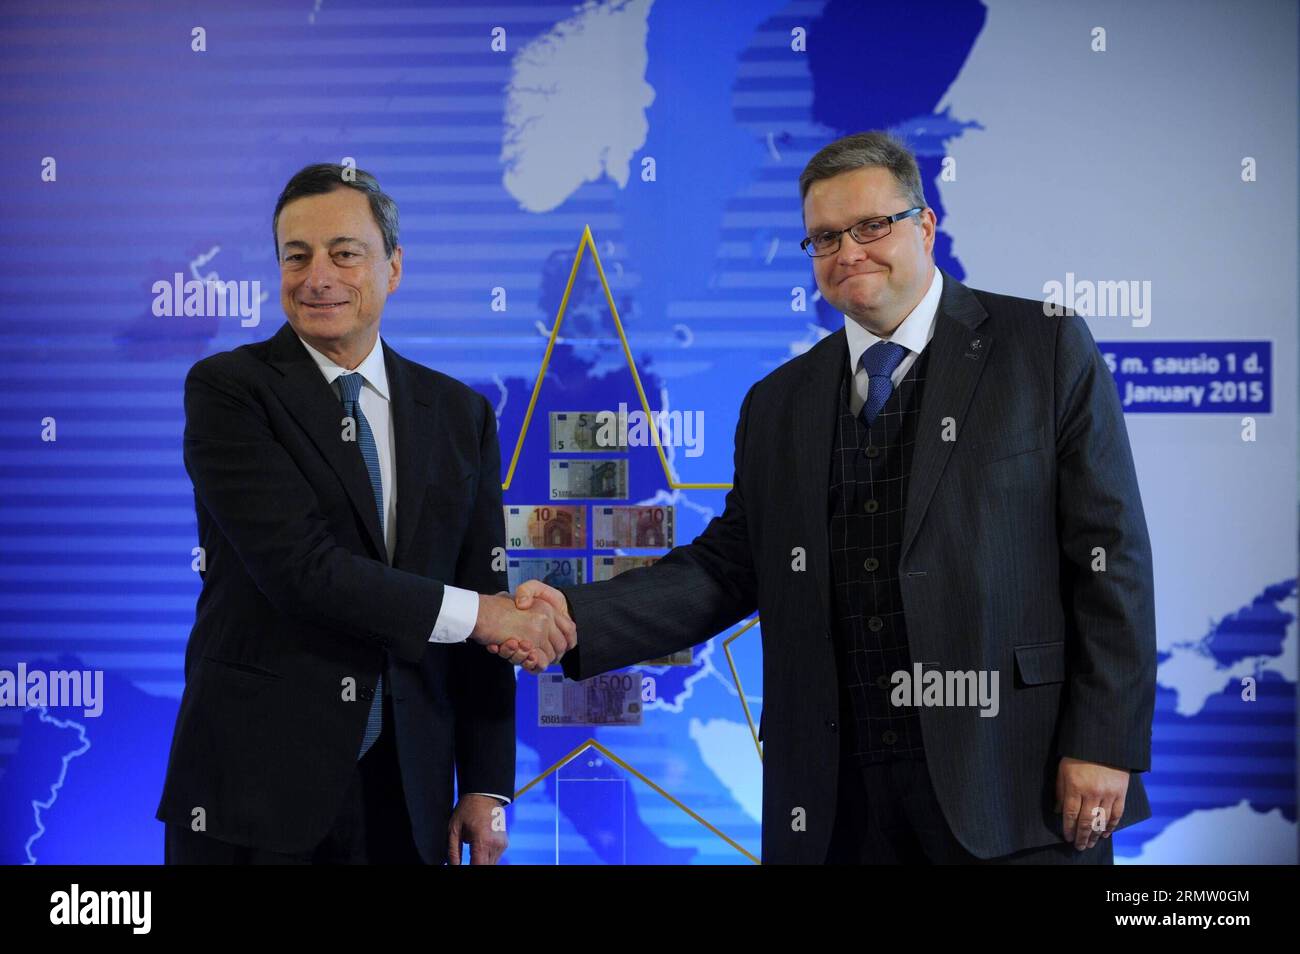 (140925) -- VILNIUS, Sept. 25, 2014 -- European Central Bank (ECB) s president Mario Draghi (L) and president of Lithuanian central bank Vitas Vasiliauskas in Vilnius, Lithuania, on Sept. 25, 2014. President of the ECB Mario Draghi handed over a Euro Star to chairman of Lithuania s Central Bank here on Thursday, a sign symbolizing Lithuania s membership in the euro area. ) (lmz) LUTHUANIA-VILNIUS-EURO STAR AlfredasxPliadis PUBLICATIONxNOTxINxCHN   Vilnius Sept 25 2014 European Central Bank ECB S President Mario Draghi l and President of Lithuanian Central Bank Vitas  in Vilnius Lithuania ON Se Stock Photo